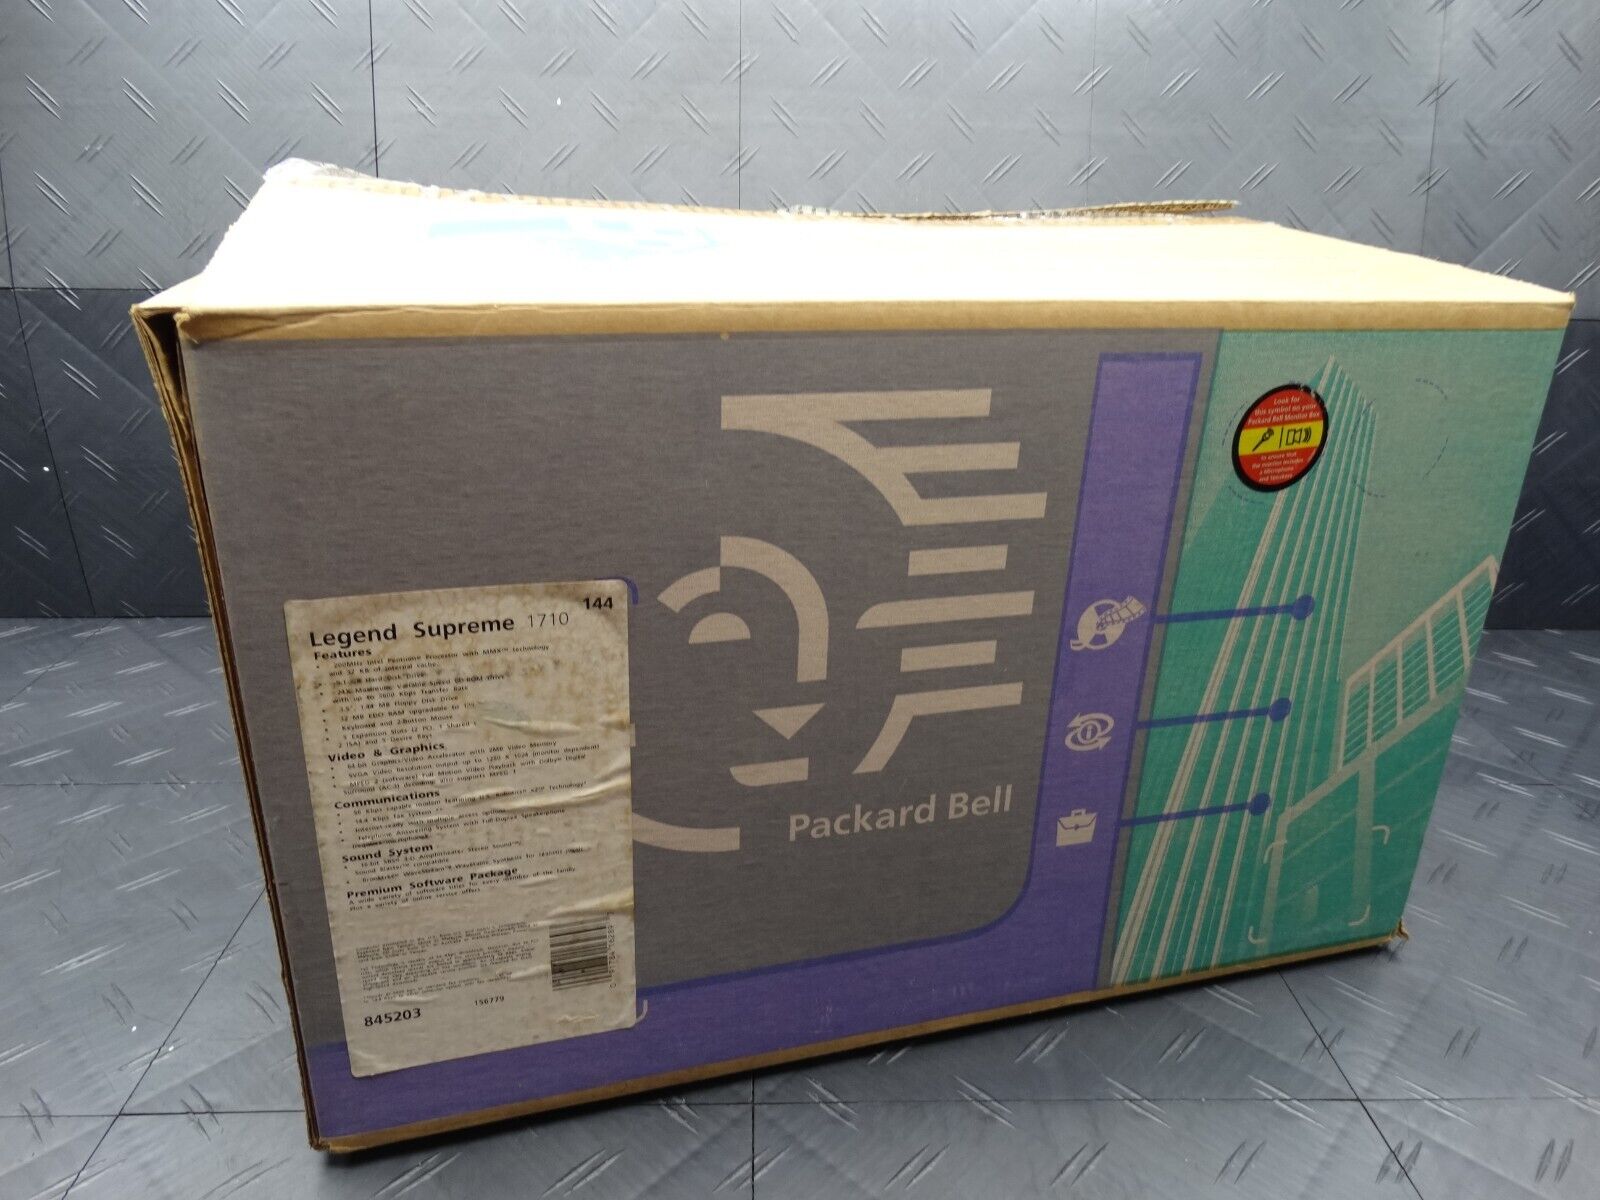 Packard Bell Rare Legend Supreme 1710 Retro Mainframe Advertising Clips Box Only